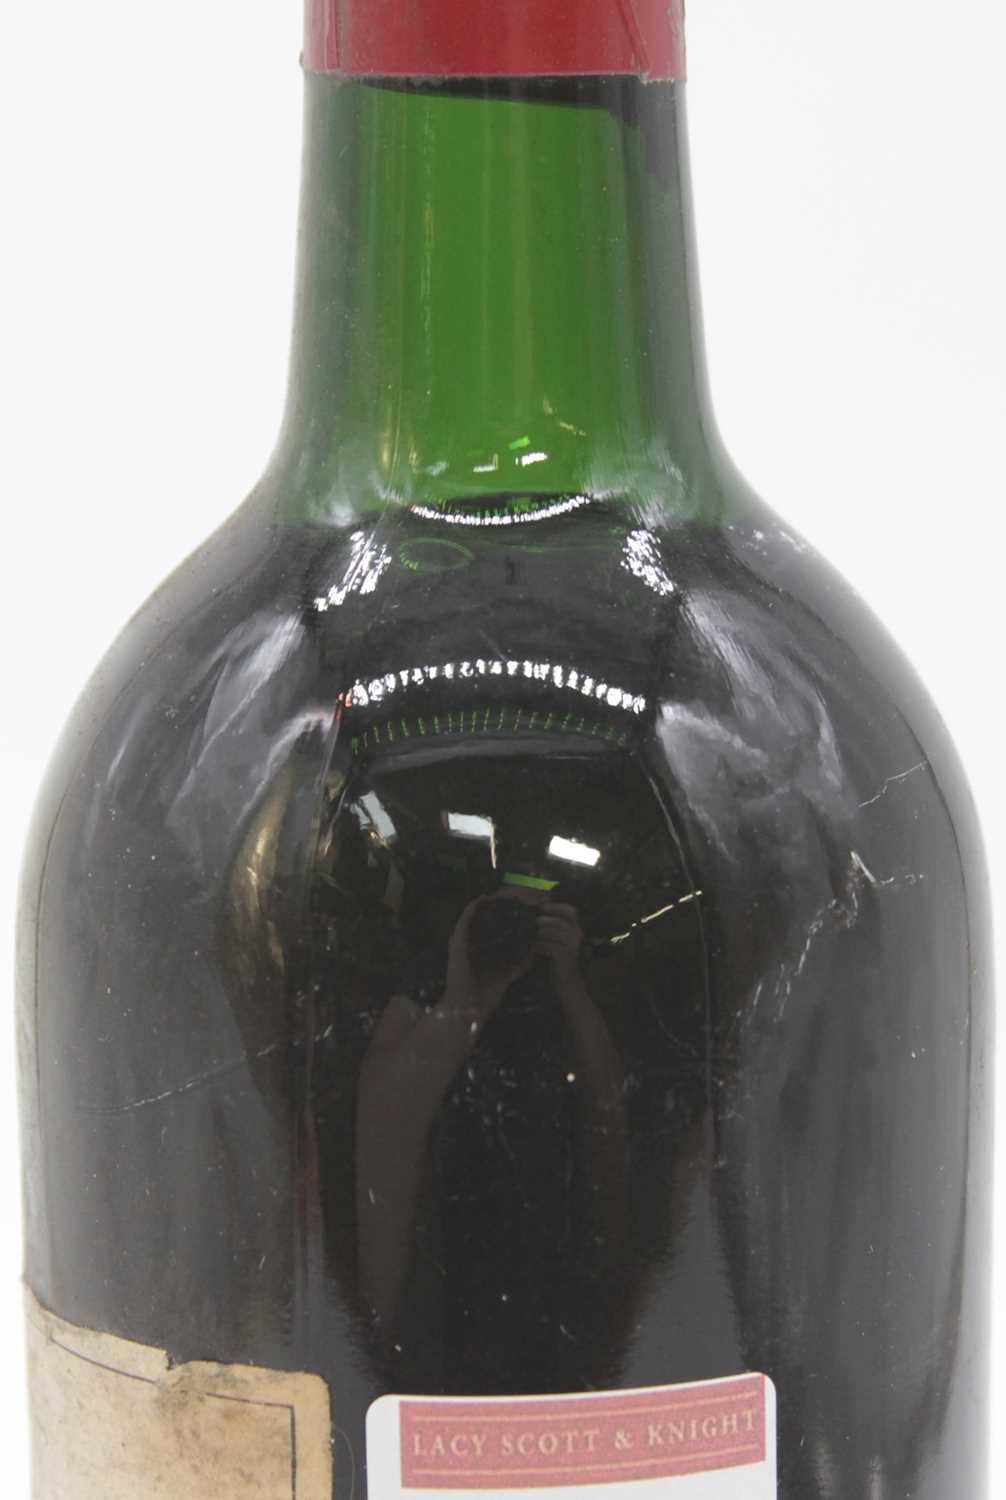 Château Giscours, 1964, Margaux, one bottle - Image 3 of 4